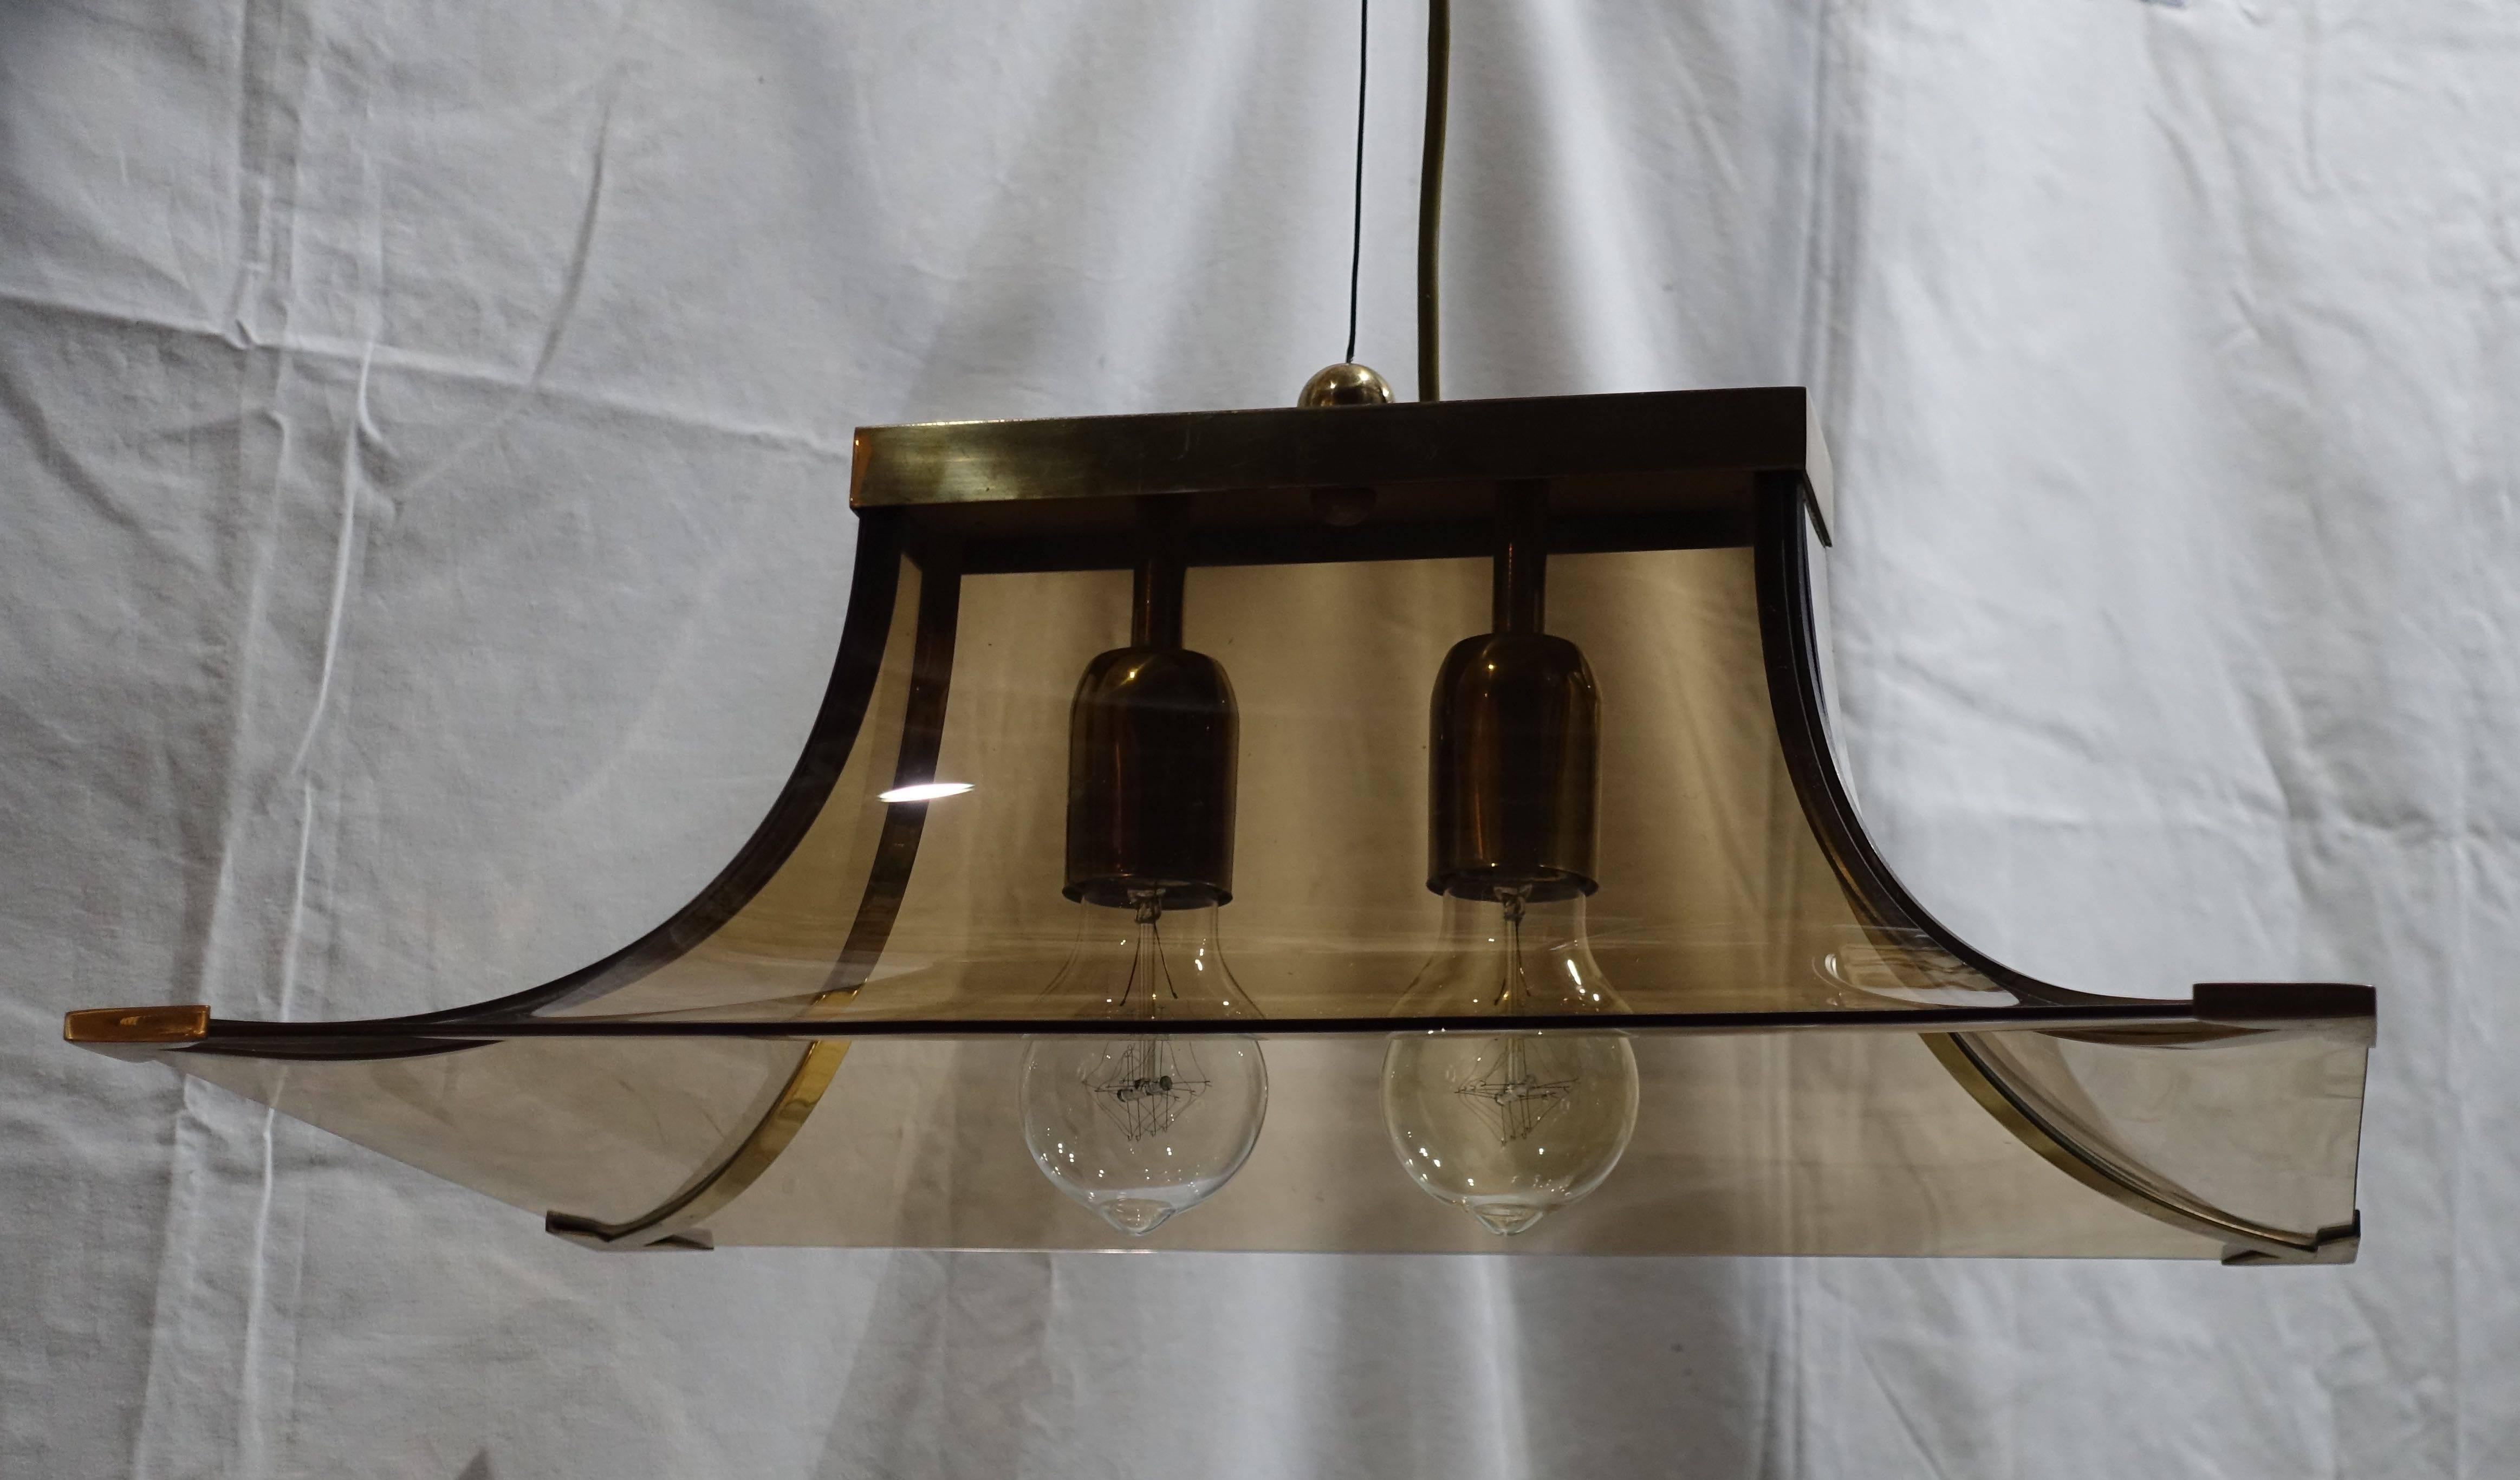 1970s Italian smoked taupe glass curved chandelier.
The chandelier has two brass sockets and brass strips trimming the edges and corners.
Recently rewired. Ceiling cap is included.
The chandelier is in excellent condition.